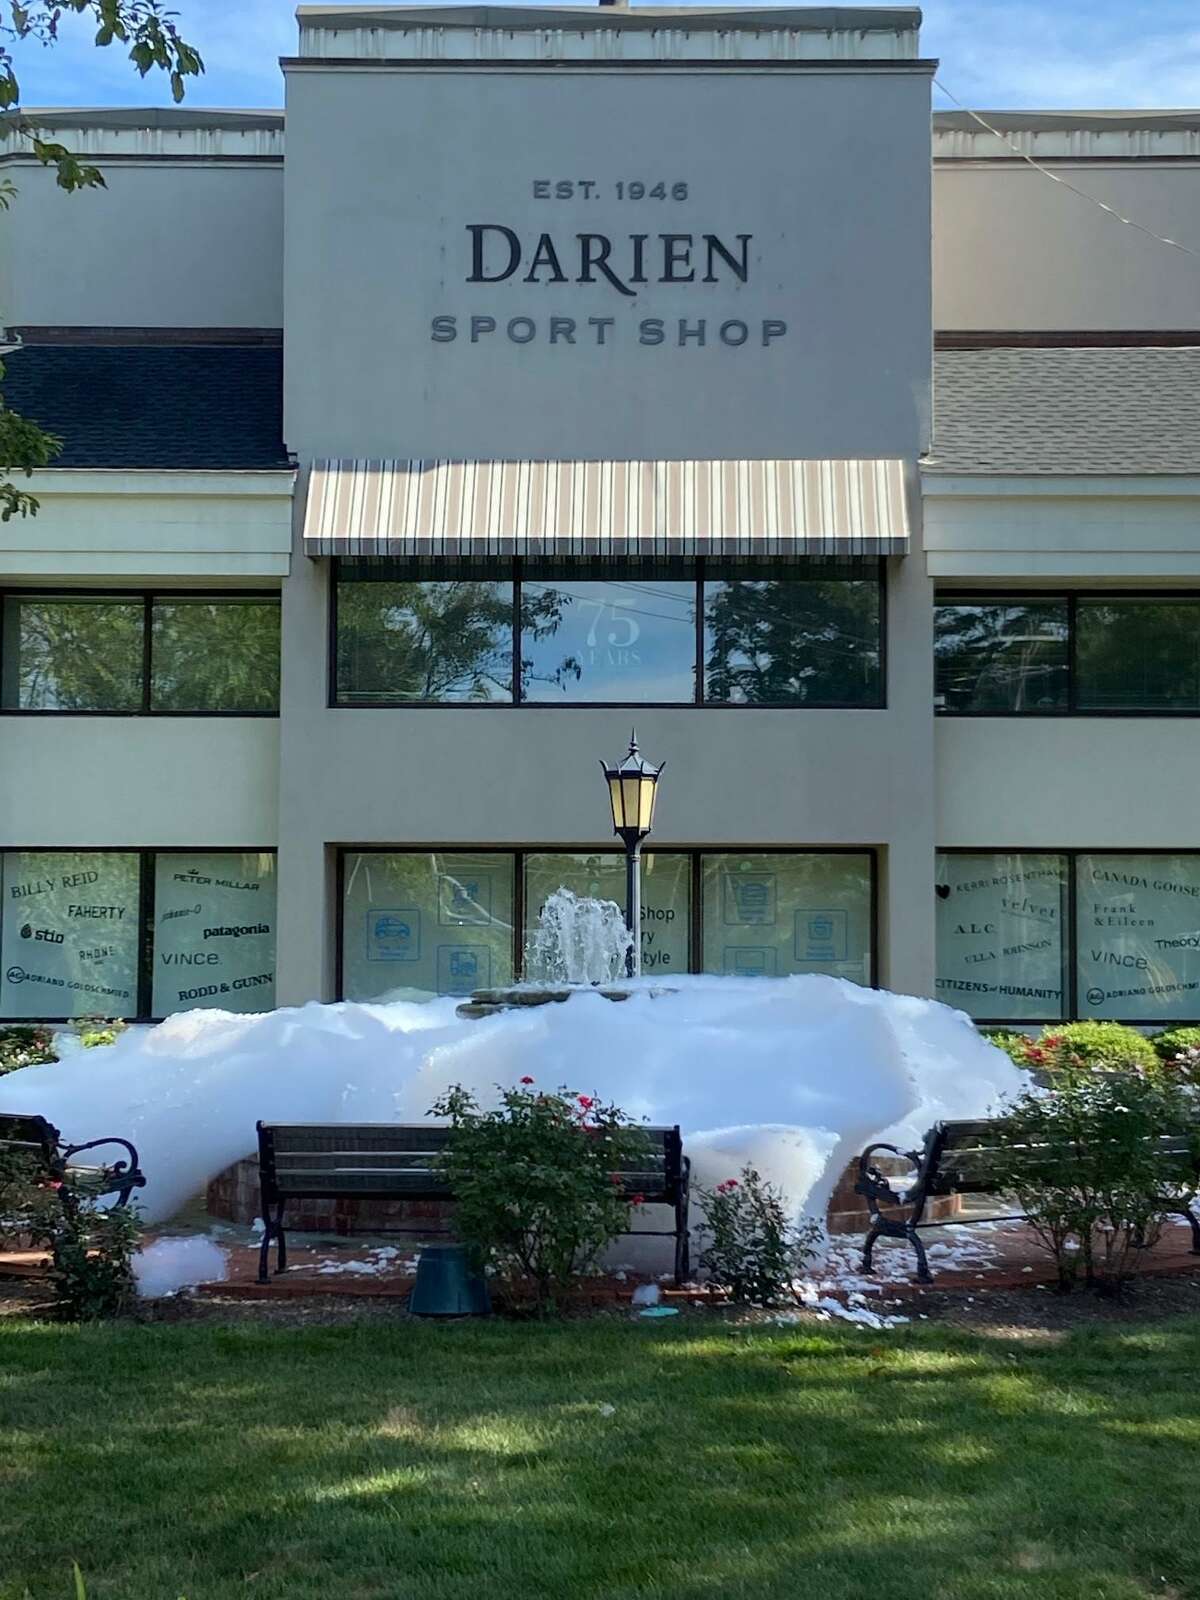 A fountain on Post Road in Darien was overflowing with bubbles and suds Sunday after pranksters put soap in the water feature, police said.